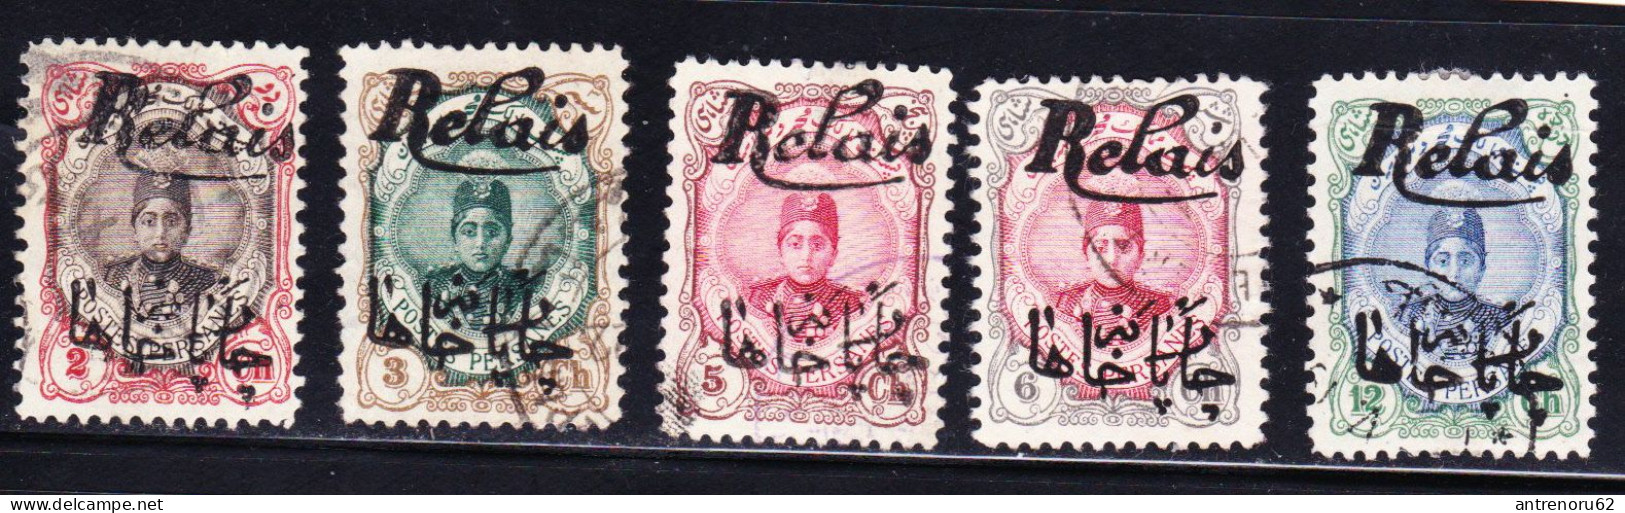 STAMPS-IRAN-1911-STAMPS-USED-SEE-SCAN-OVERPRINT - Iran